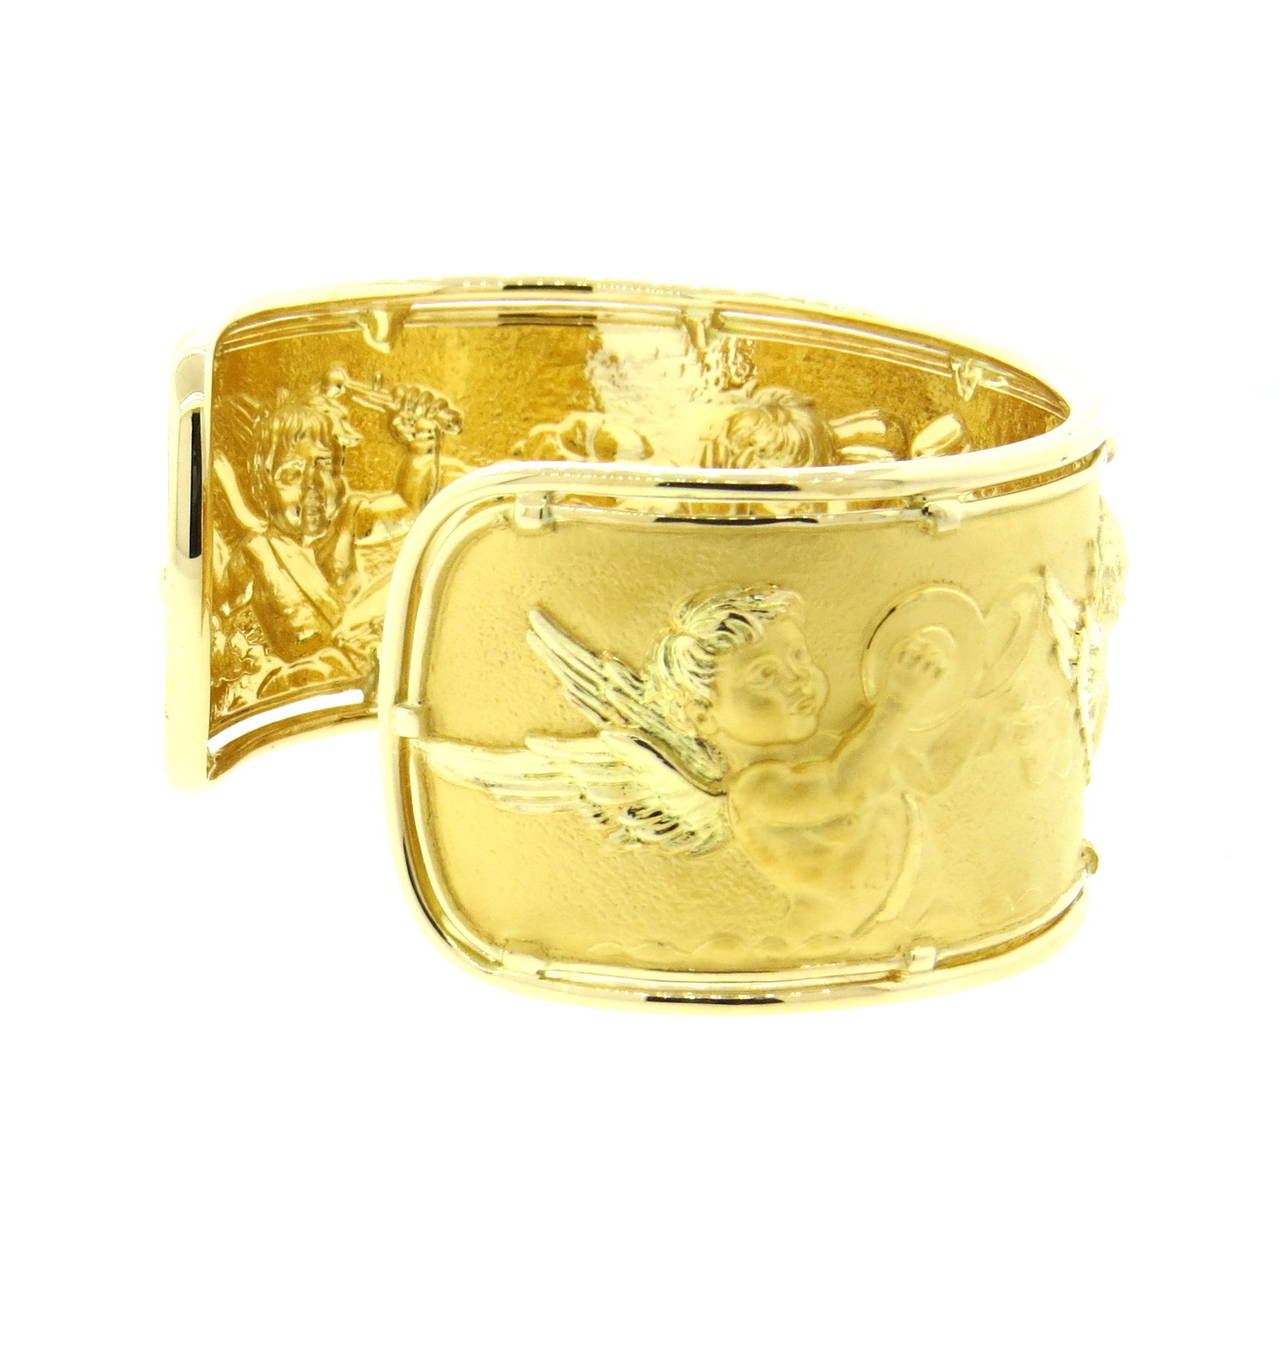 An 18k yellow gold cuff bracelet depicting cherubs playing musical instruments.  Crafted by Carrera y Carrera, the bracelet is 36mm wide and comfortably fits up to a 7